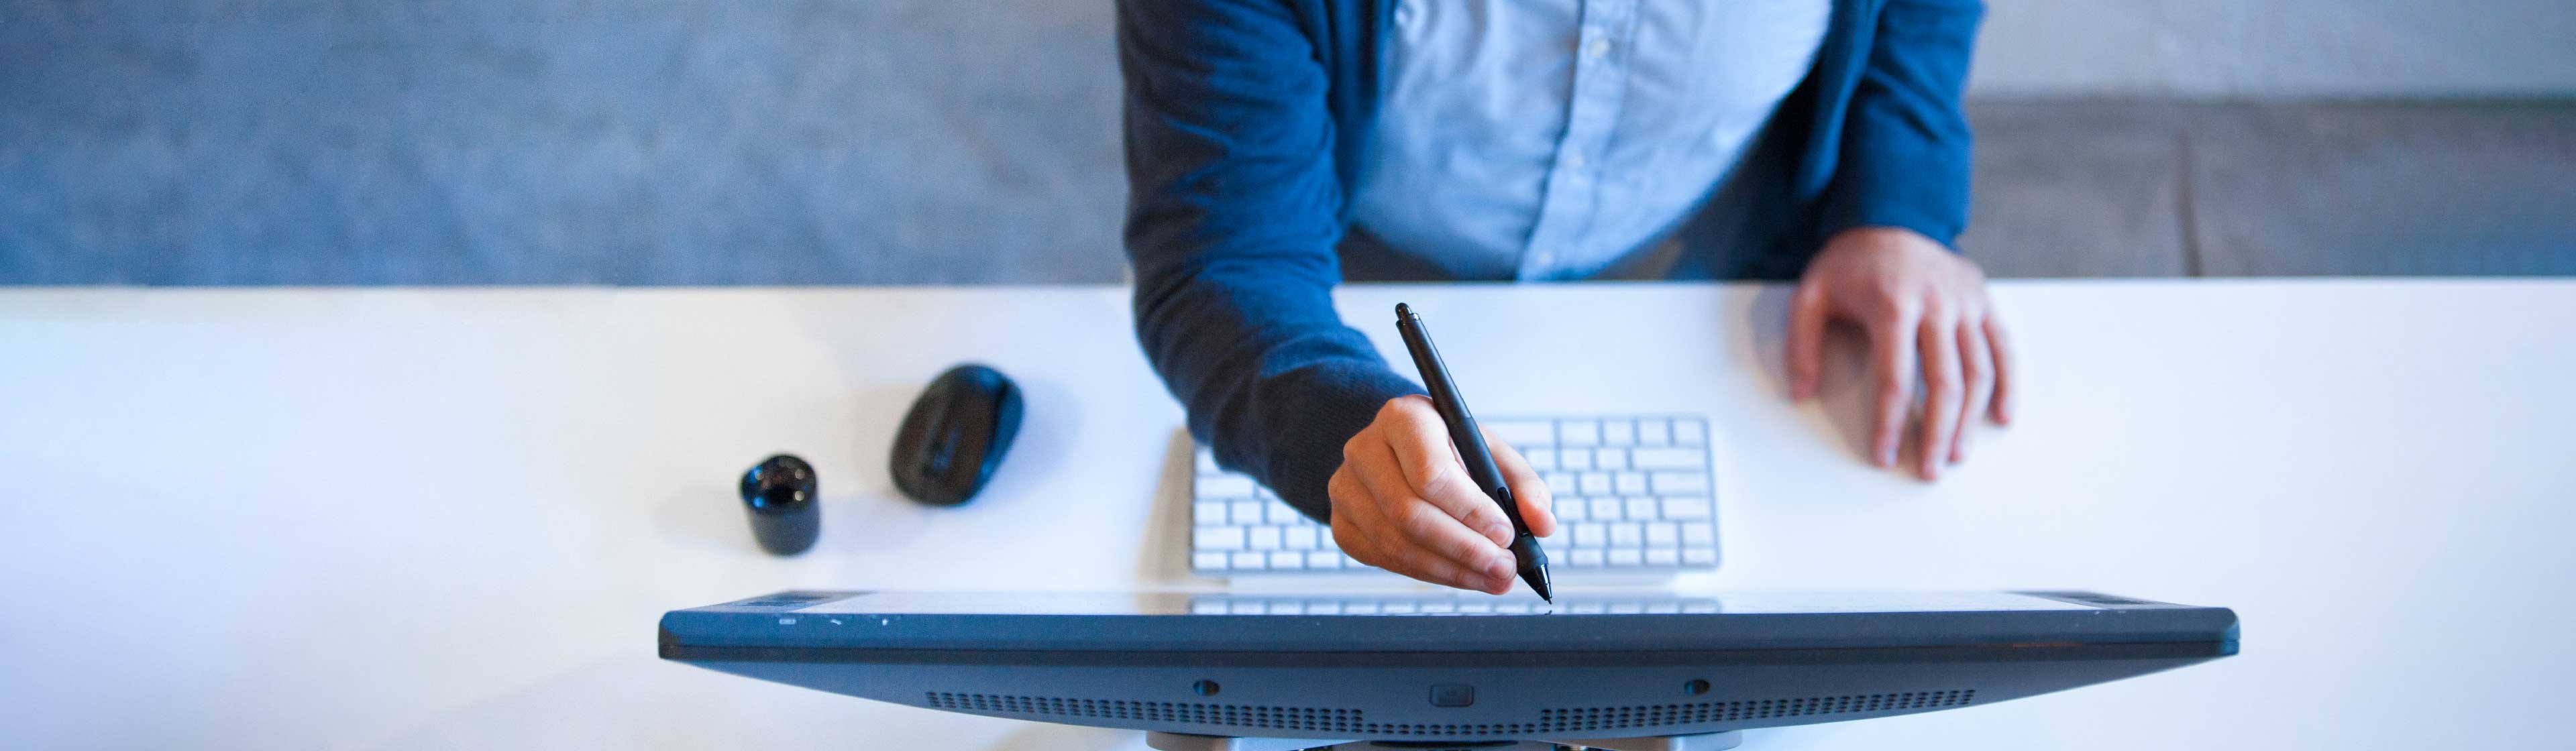 A person in a suit using s stylus to write on a monitor